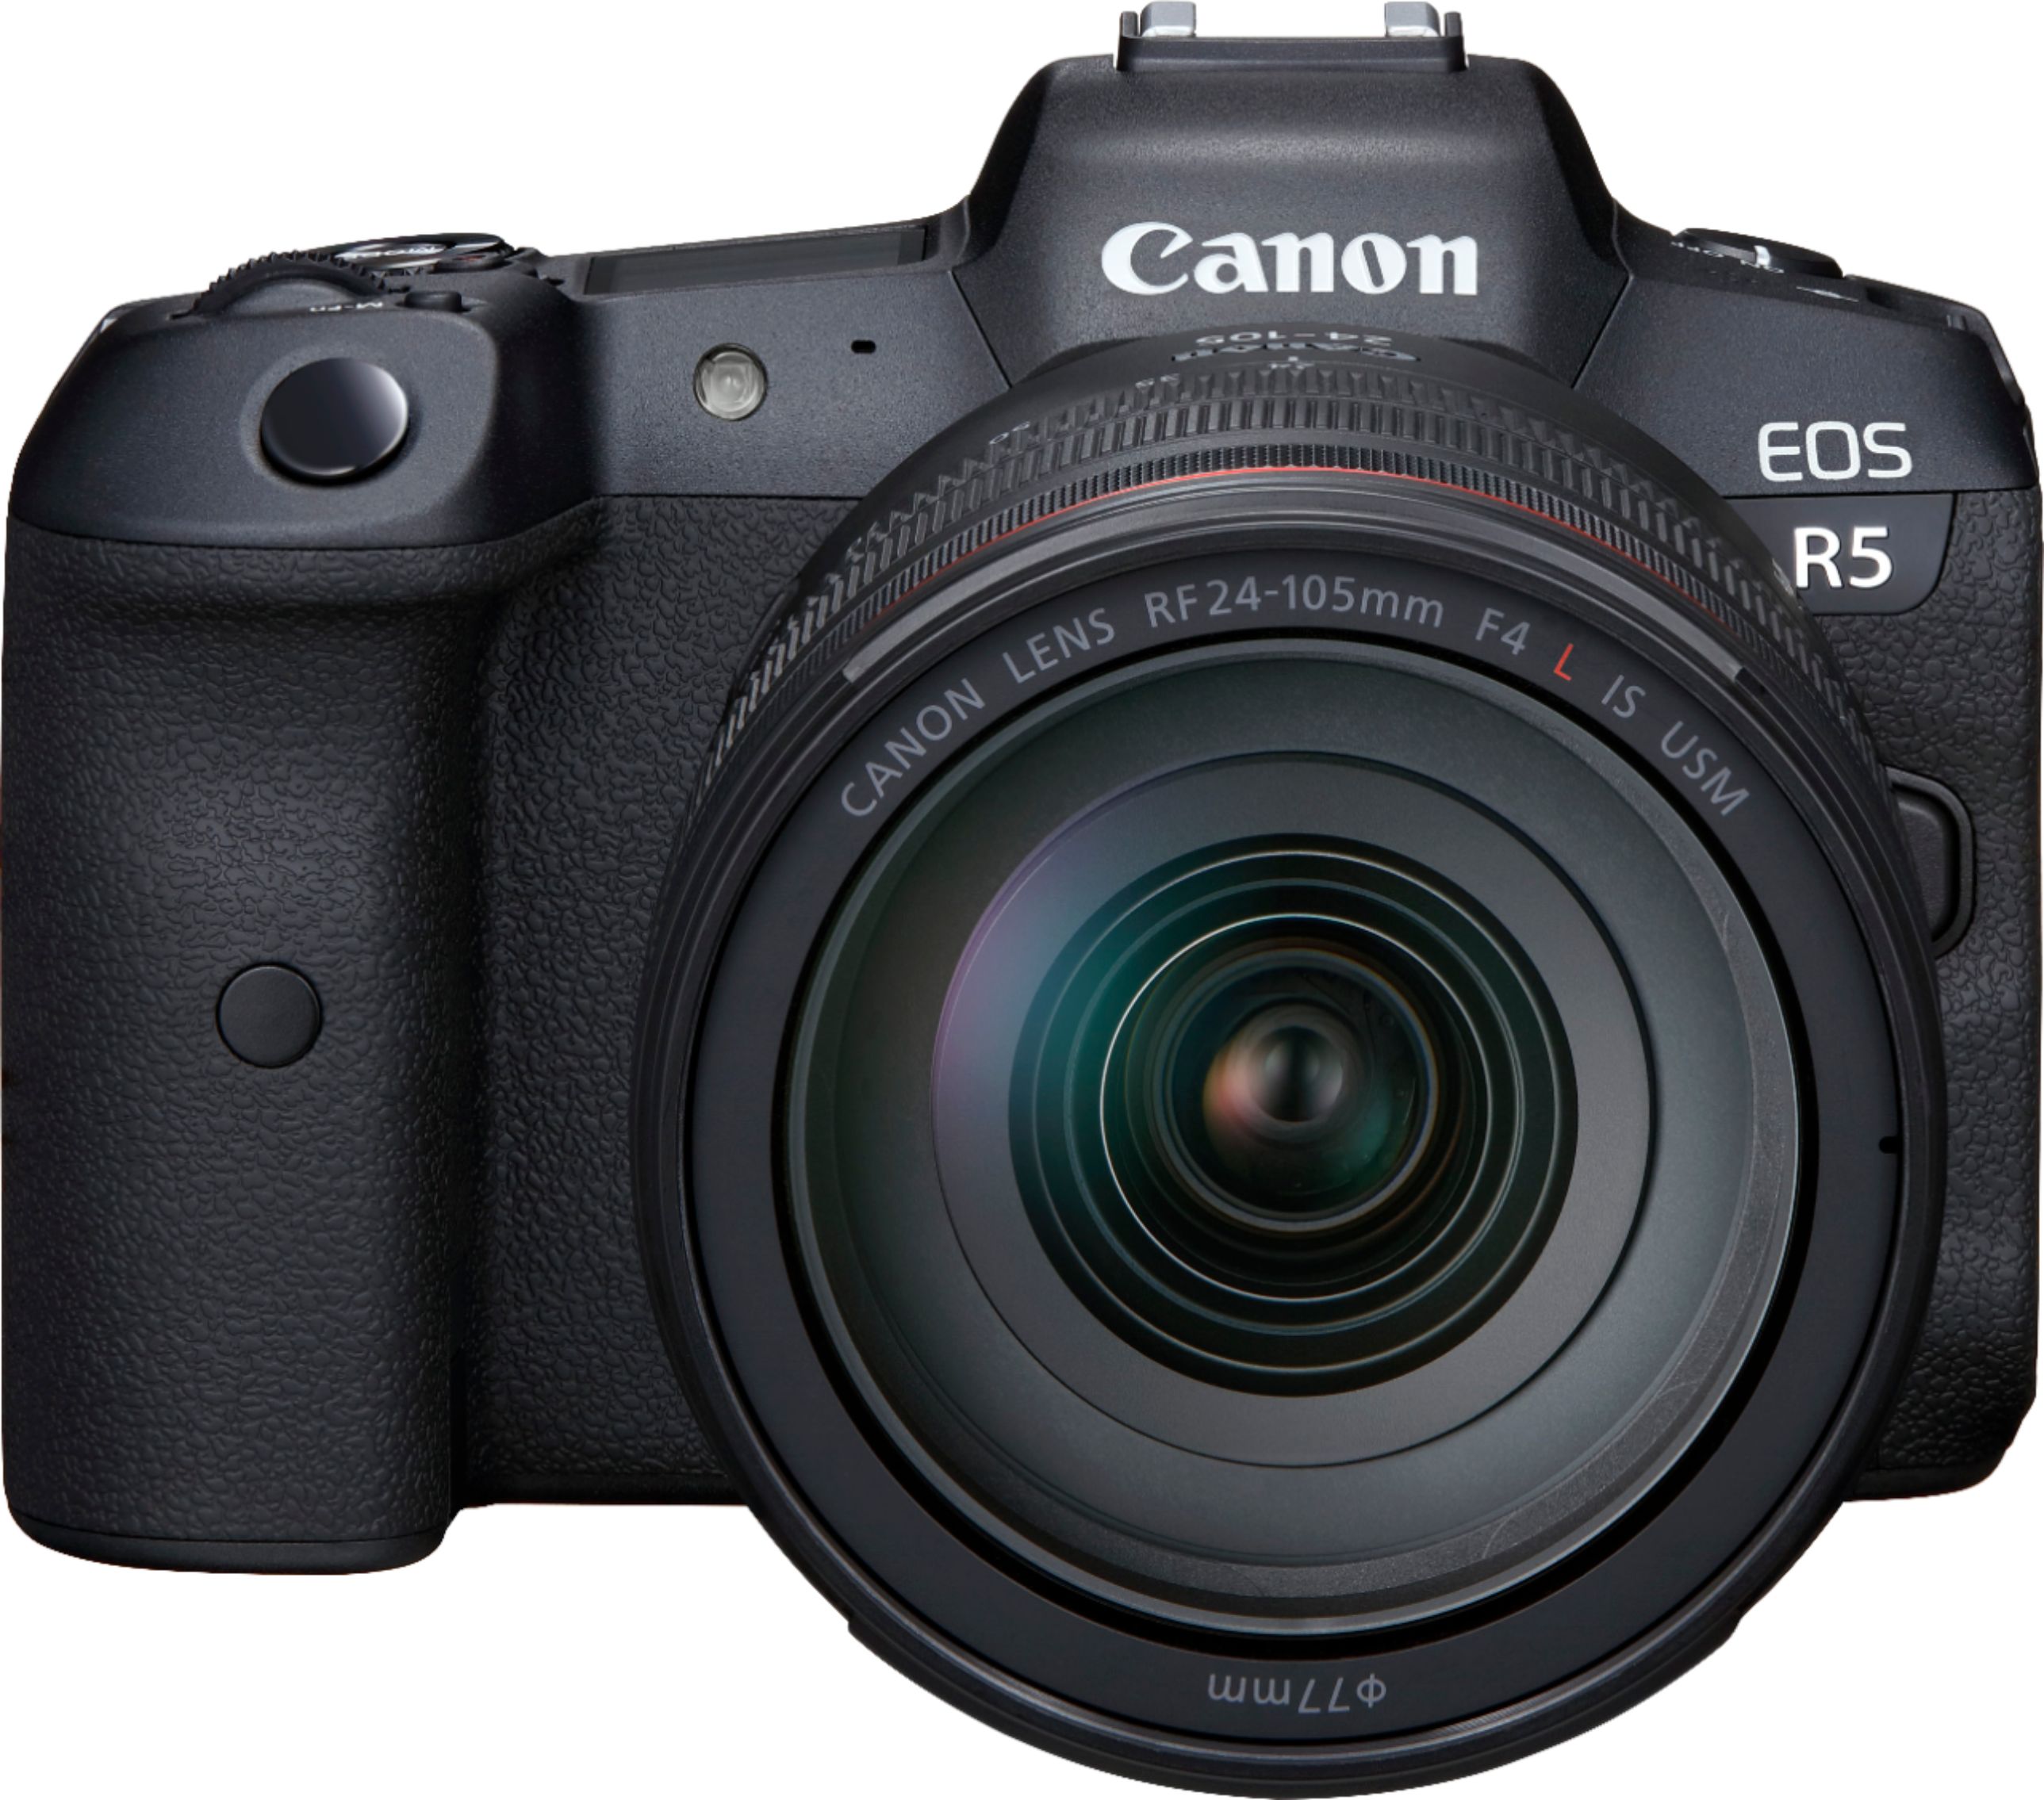 Canon EOS R5 Mirrorless Camera with RF 24-105mm f/4L IS USM Lens Black  4147C013 - Best Buy